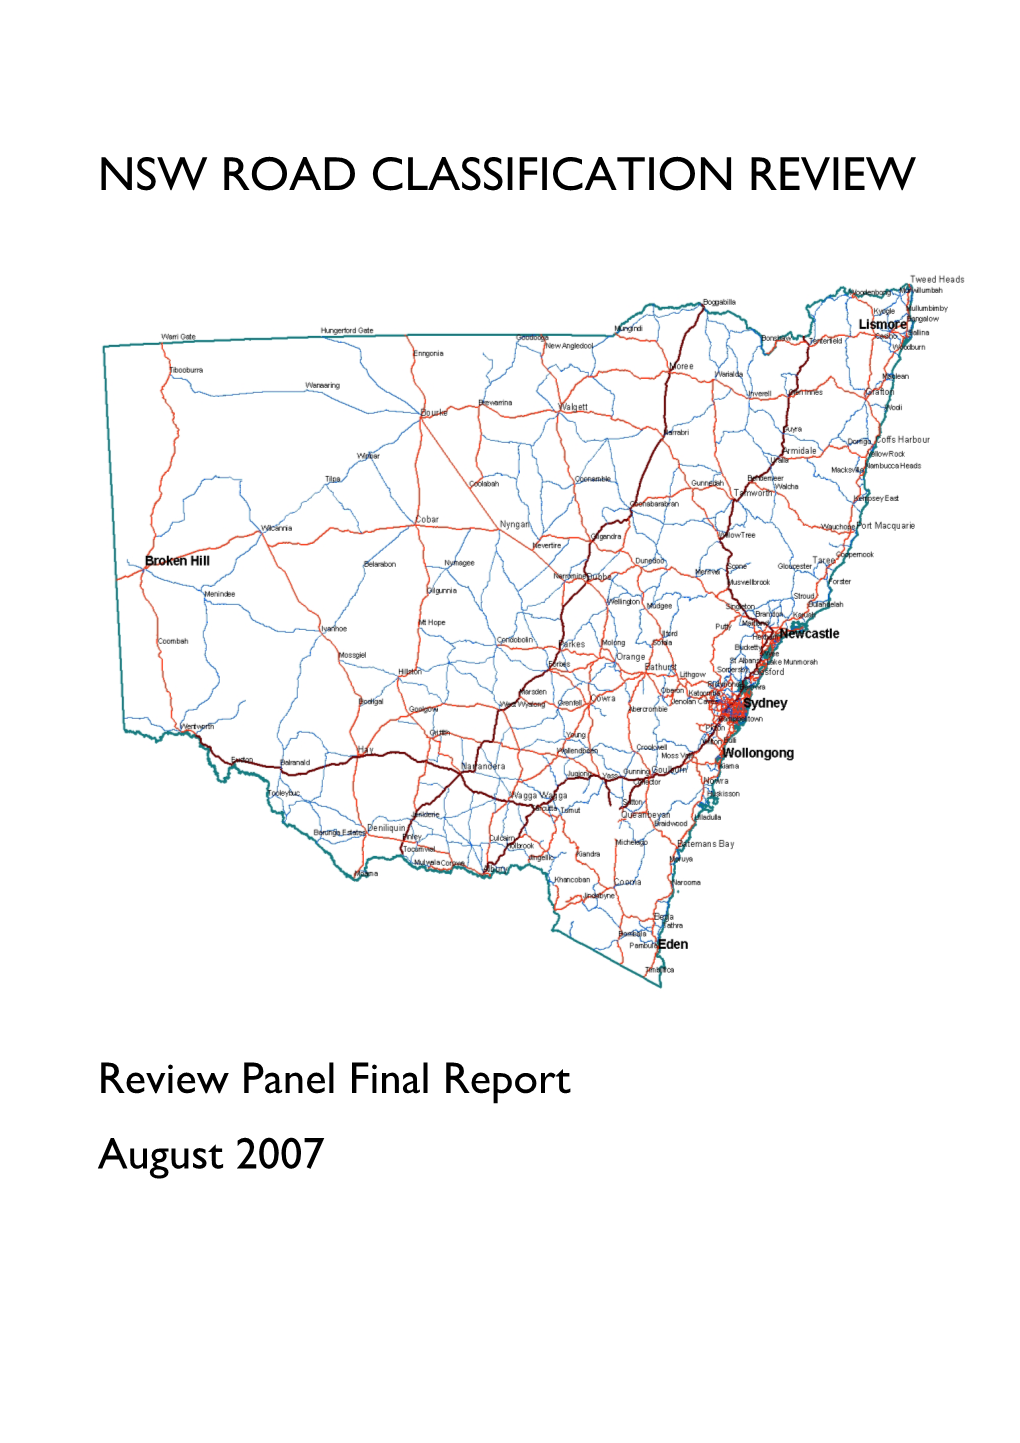 NSW Road Classification Review